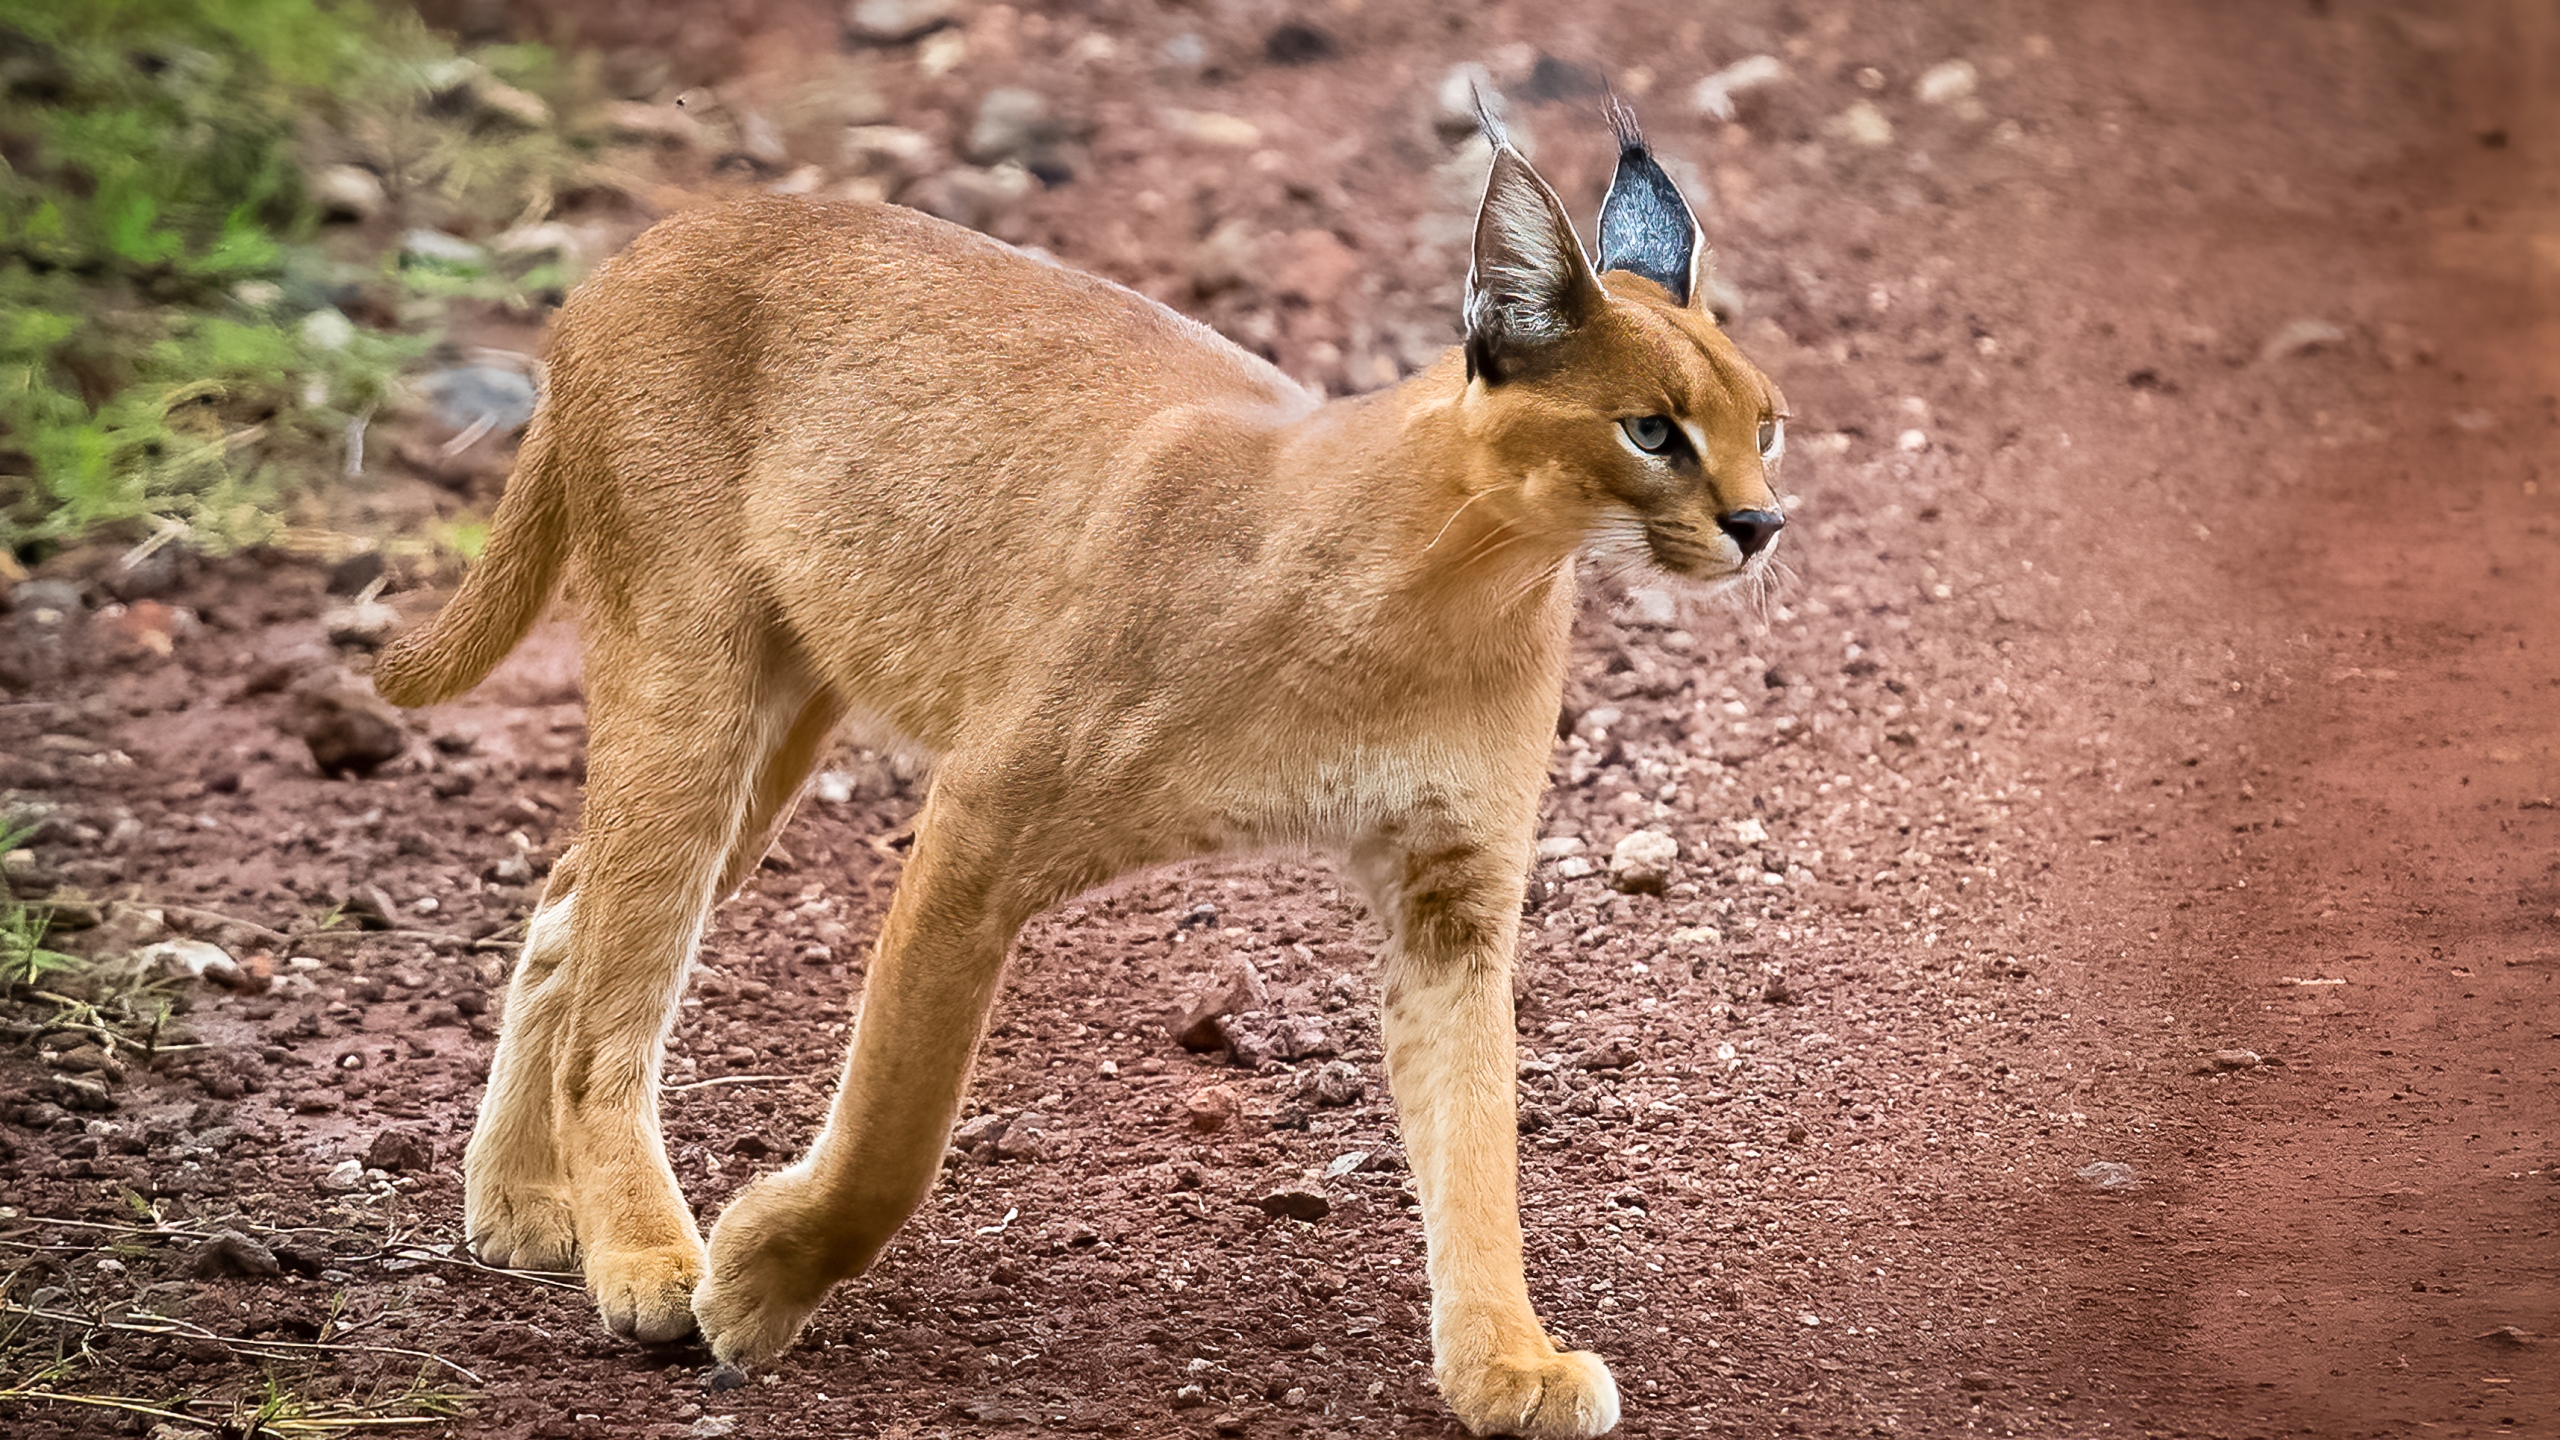 Caracal cat owner ticketed, ordered to find them new home